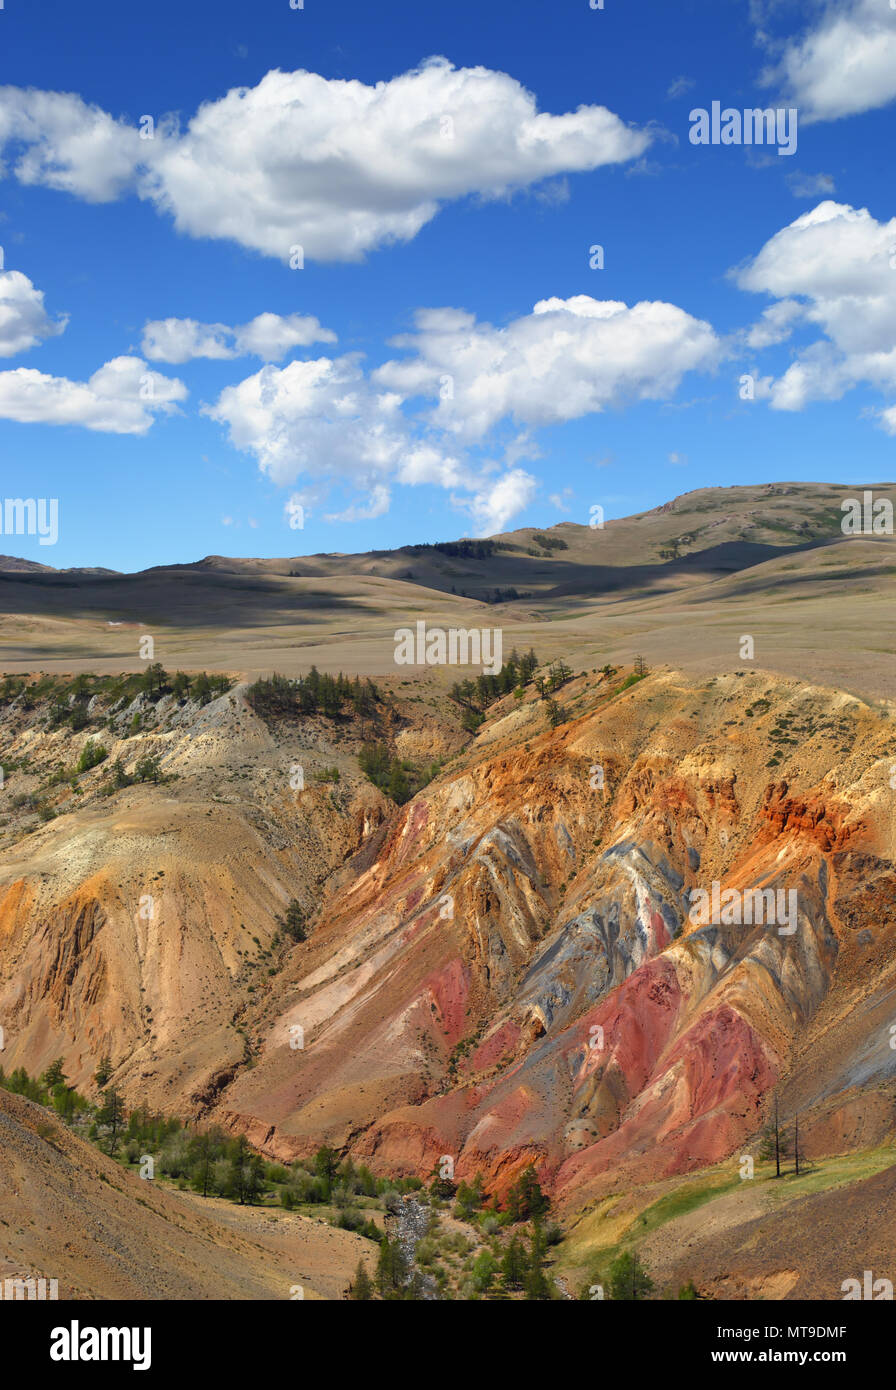 Deposit of colorful clay in Altai Mountains Stock Photo